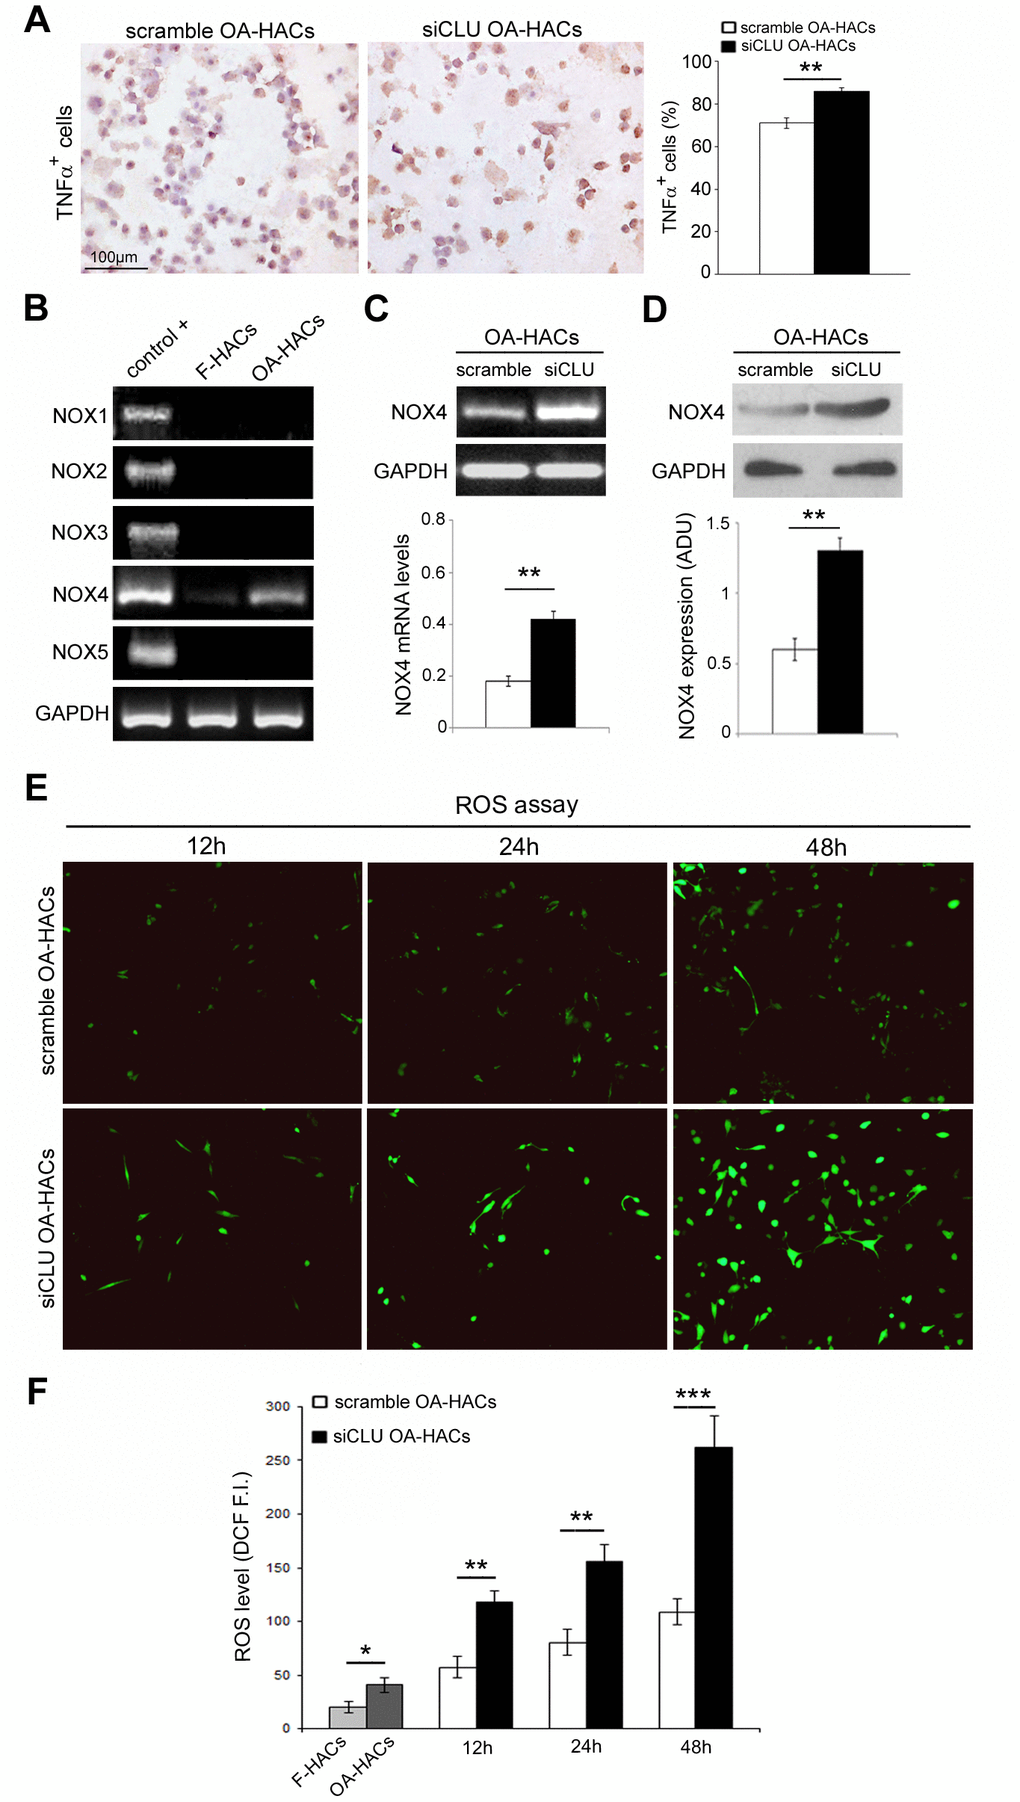 Effects of CLU silencing on TNFα and ROS levels in cultured OA chondrocytes. (A) Representative immunocytochemical images and evaluation of TNFα+ cytospinned OA-HACs after 72 hours of CLU silencing. (B) Basal mRNA expression of NOX isoforms by RT-PCR in cultured chondrocytes. (C, D) RT-PCR and blot analysis of NOX4 expression in scramble and CLU-silenced OA-HACs. (E, F) Representative images and quantitative measurement of ROS levels (green fluorescence) after 12, 24 and 48 hours of CLU silencing compared with control (scramble) and HACs from fractured patients; original magnification, 100X. Data are expressed as mean values ± SEM of three independent experiments (each using pooled samples from n=3 donors) performed in triplicate. Abbreviations: F-HACs, fractured patient human articular chondrocytes; OA-HACs, OA-Human articular chondrocytes; ADU, arbitrary densitometric unit; F.I., fluorescence intensity. Student’s t-test: *P P P 